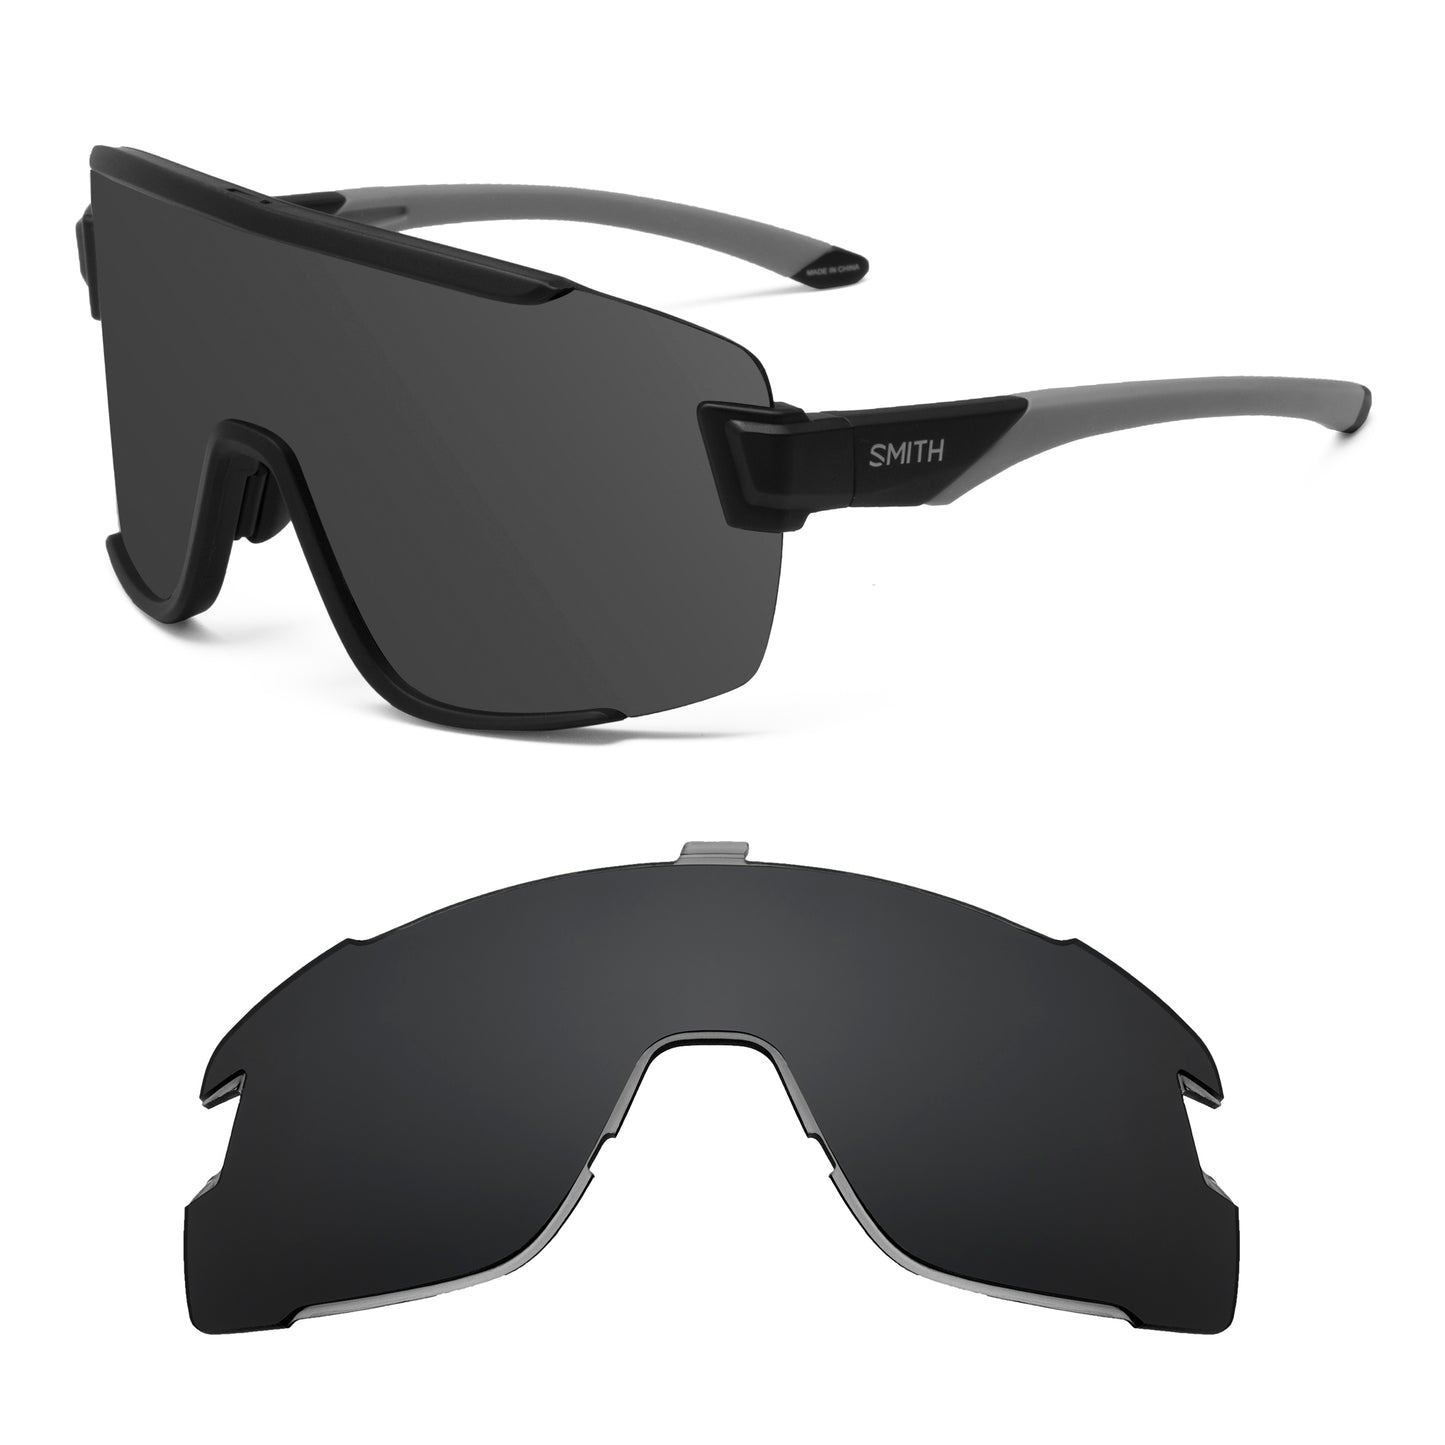 Smith Wildcat sunglasses with replacement lenses